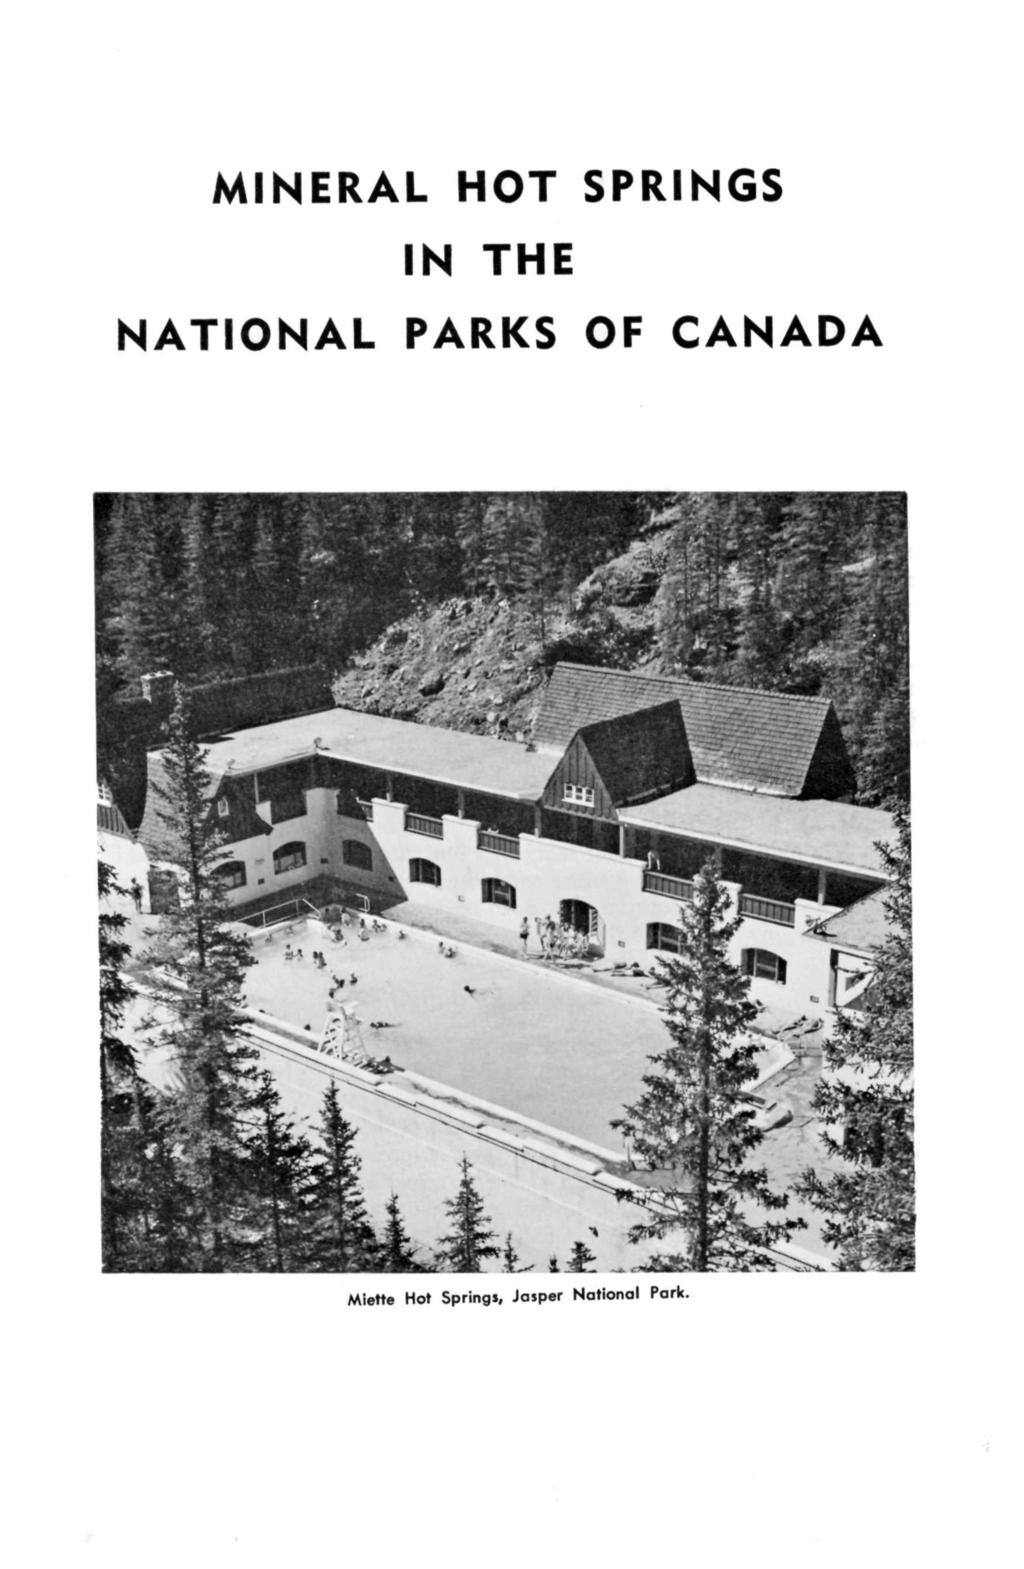 MINERAL HOT SPRINGS IN THE NATIONAL PARKS OF